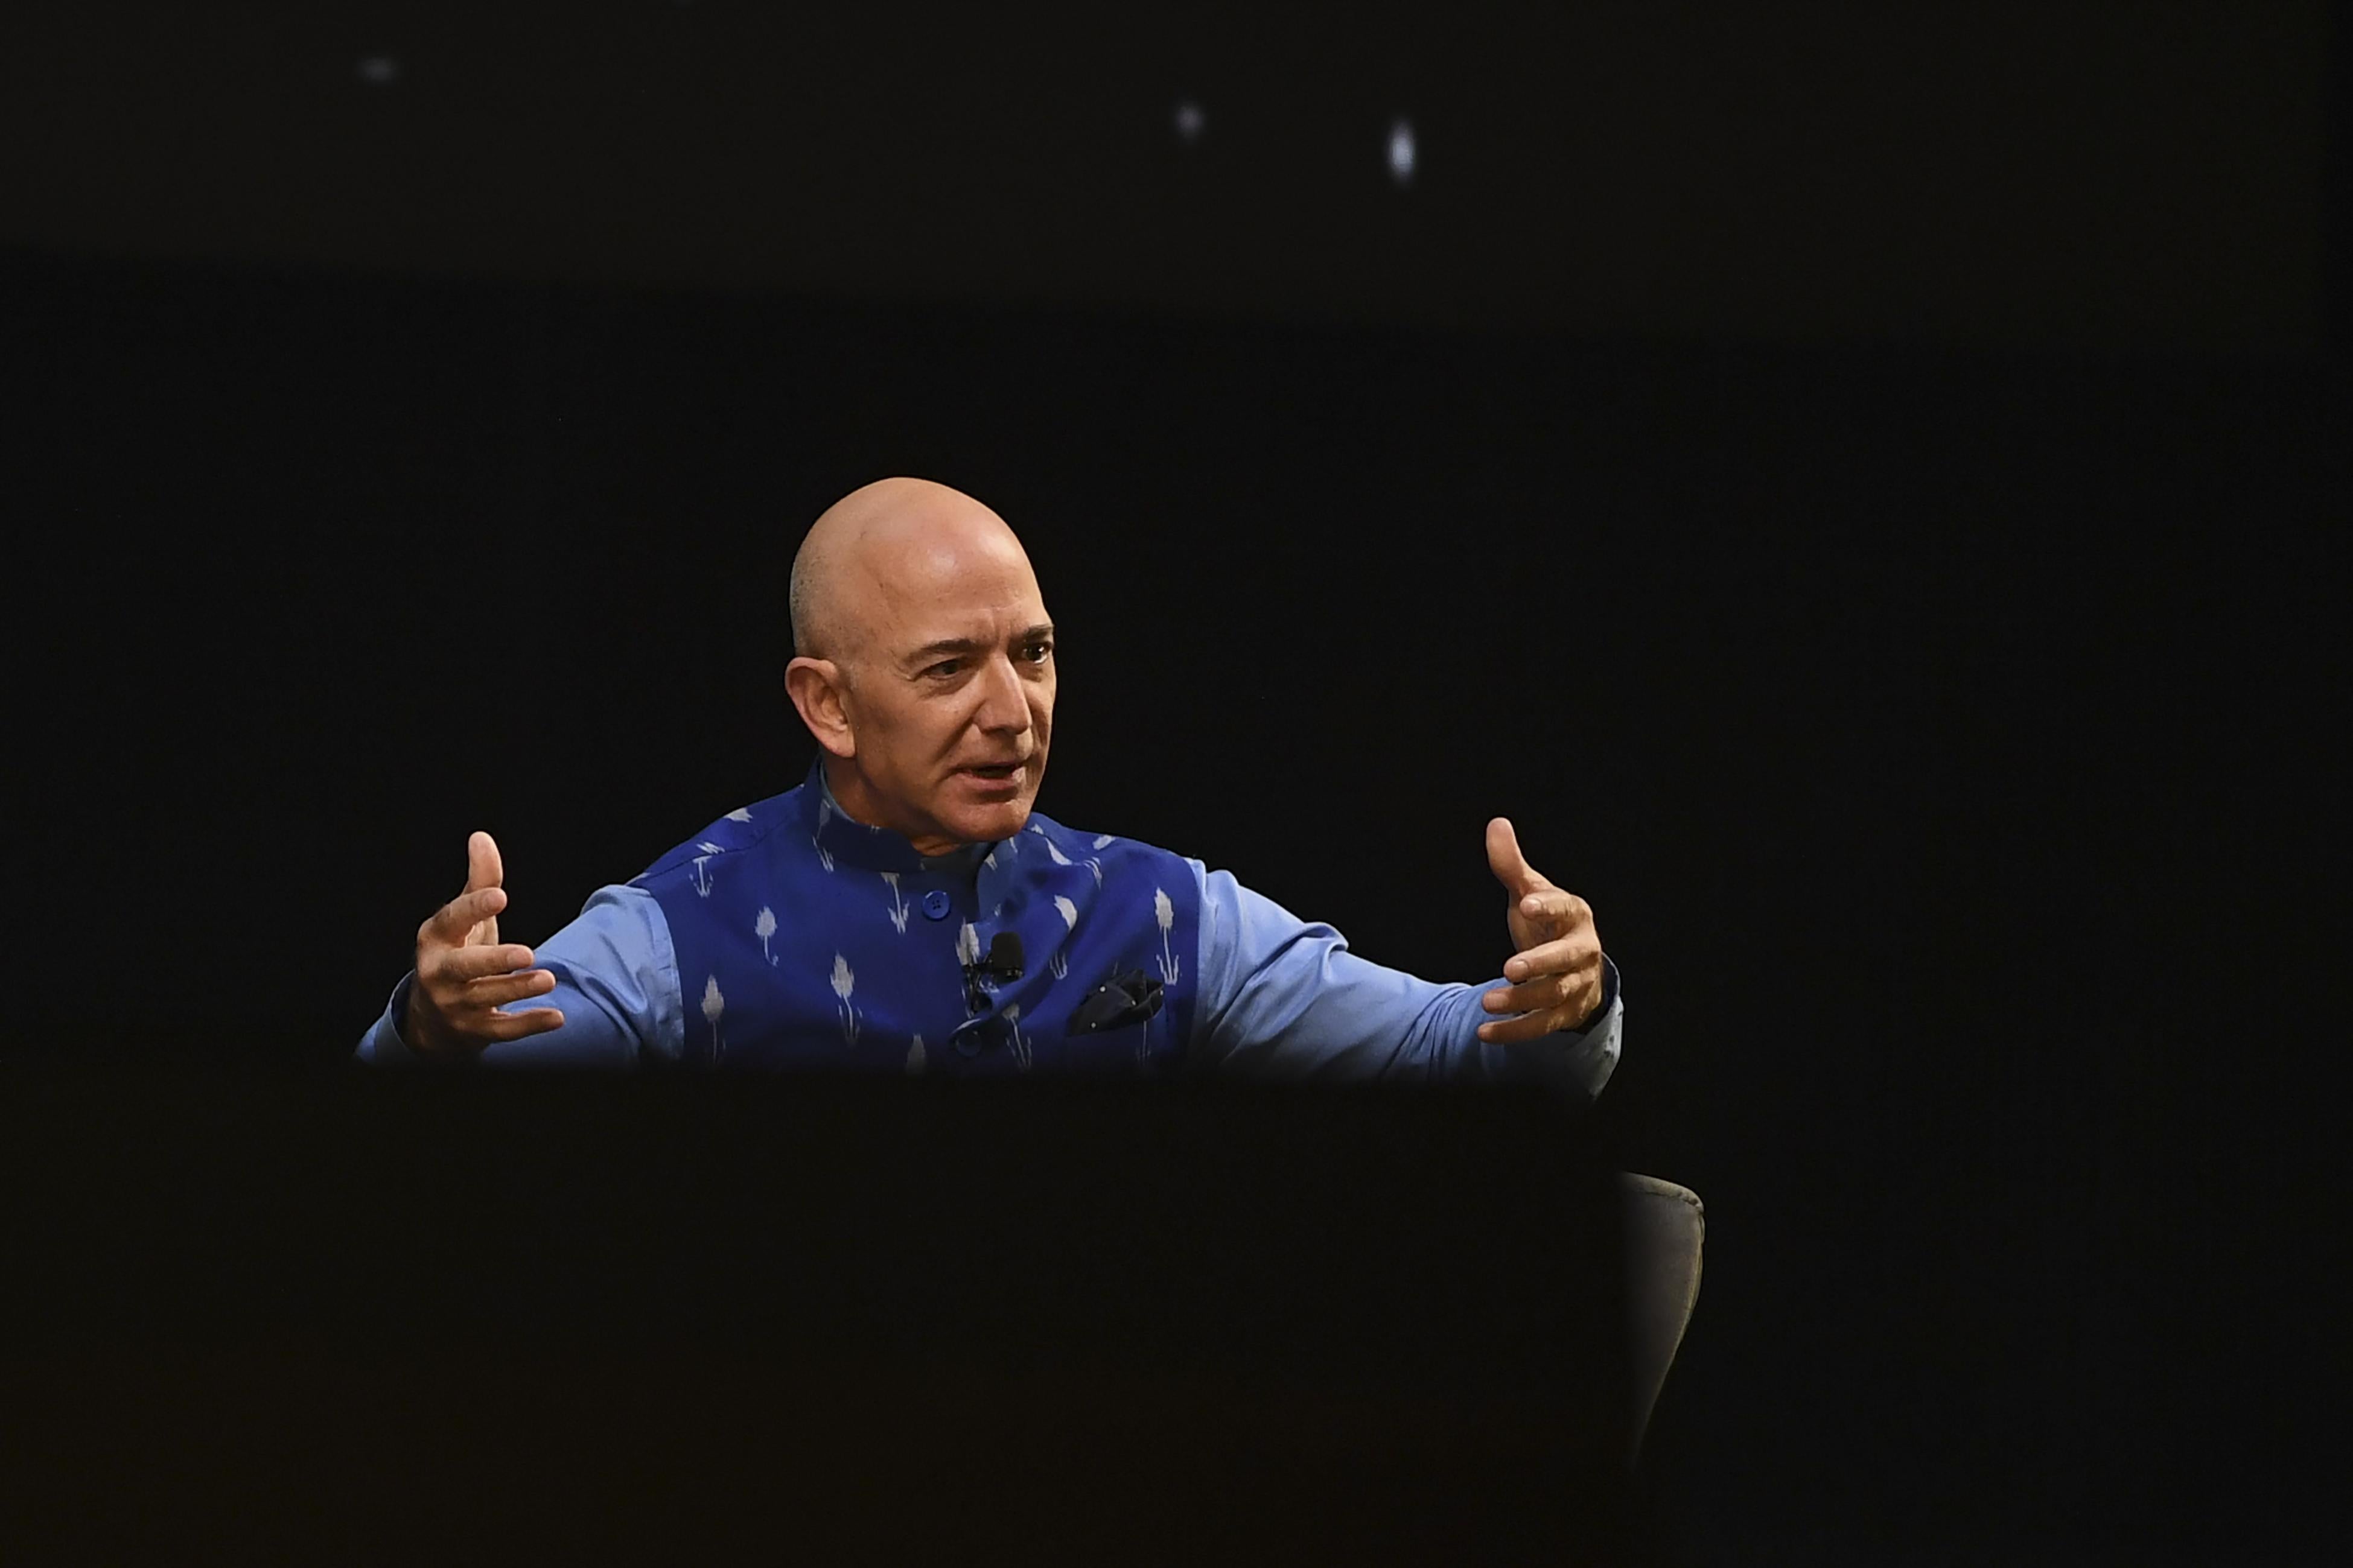 Jeff Bezos gestures with open arms as he speaks on a black stage.